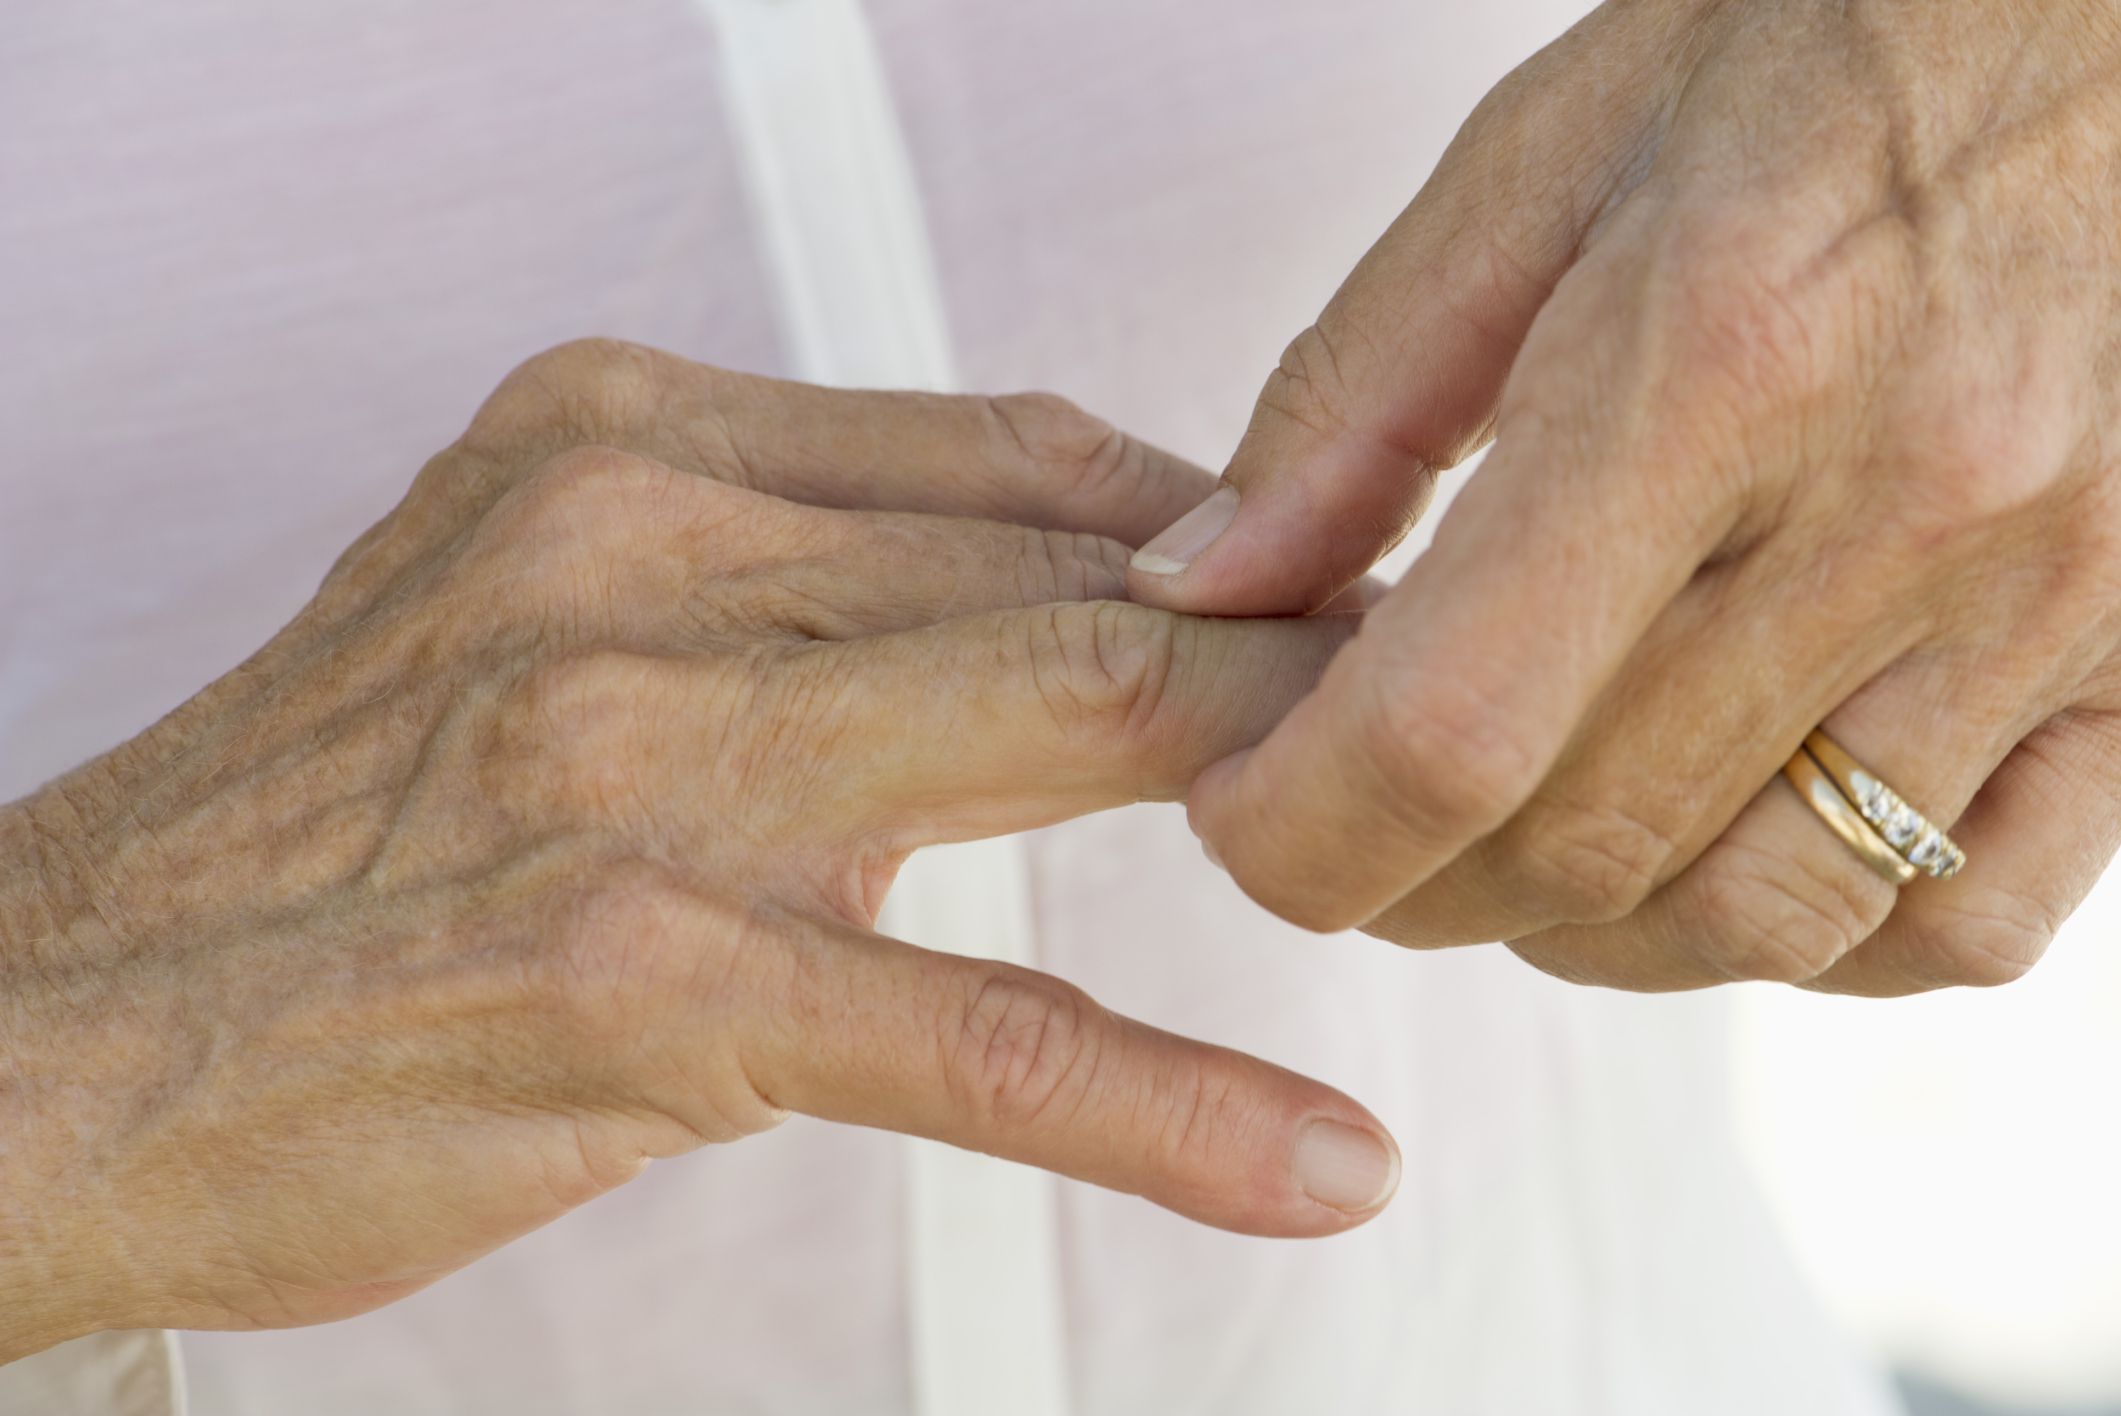 Does Joint Popping or Snapping Cause Arthritis?